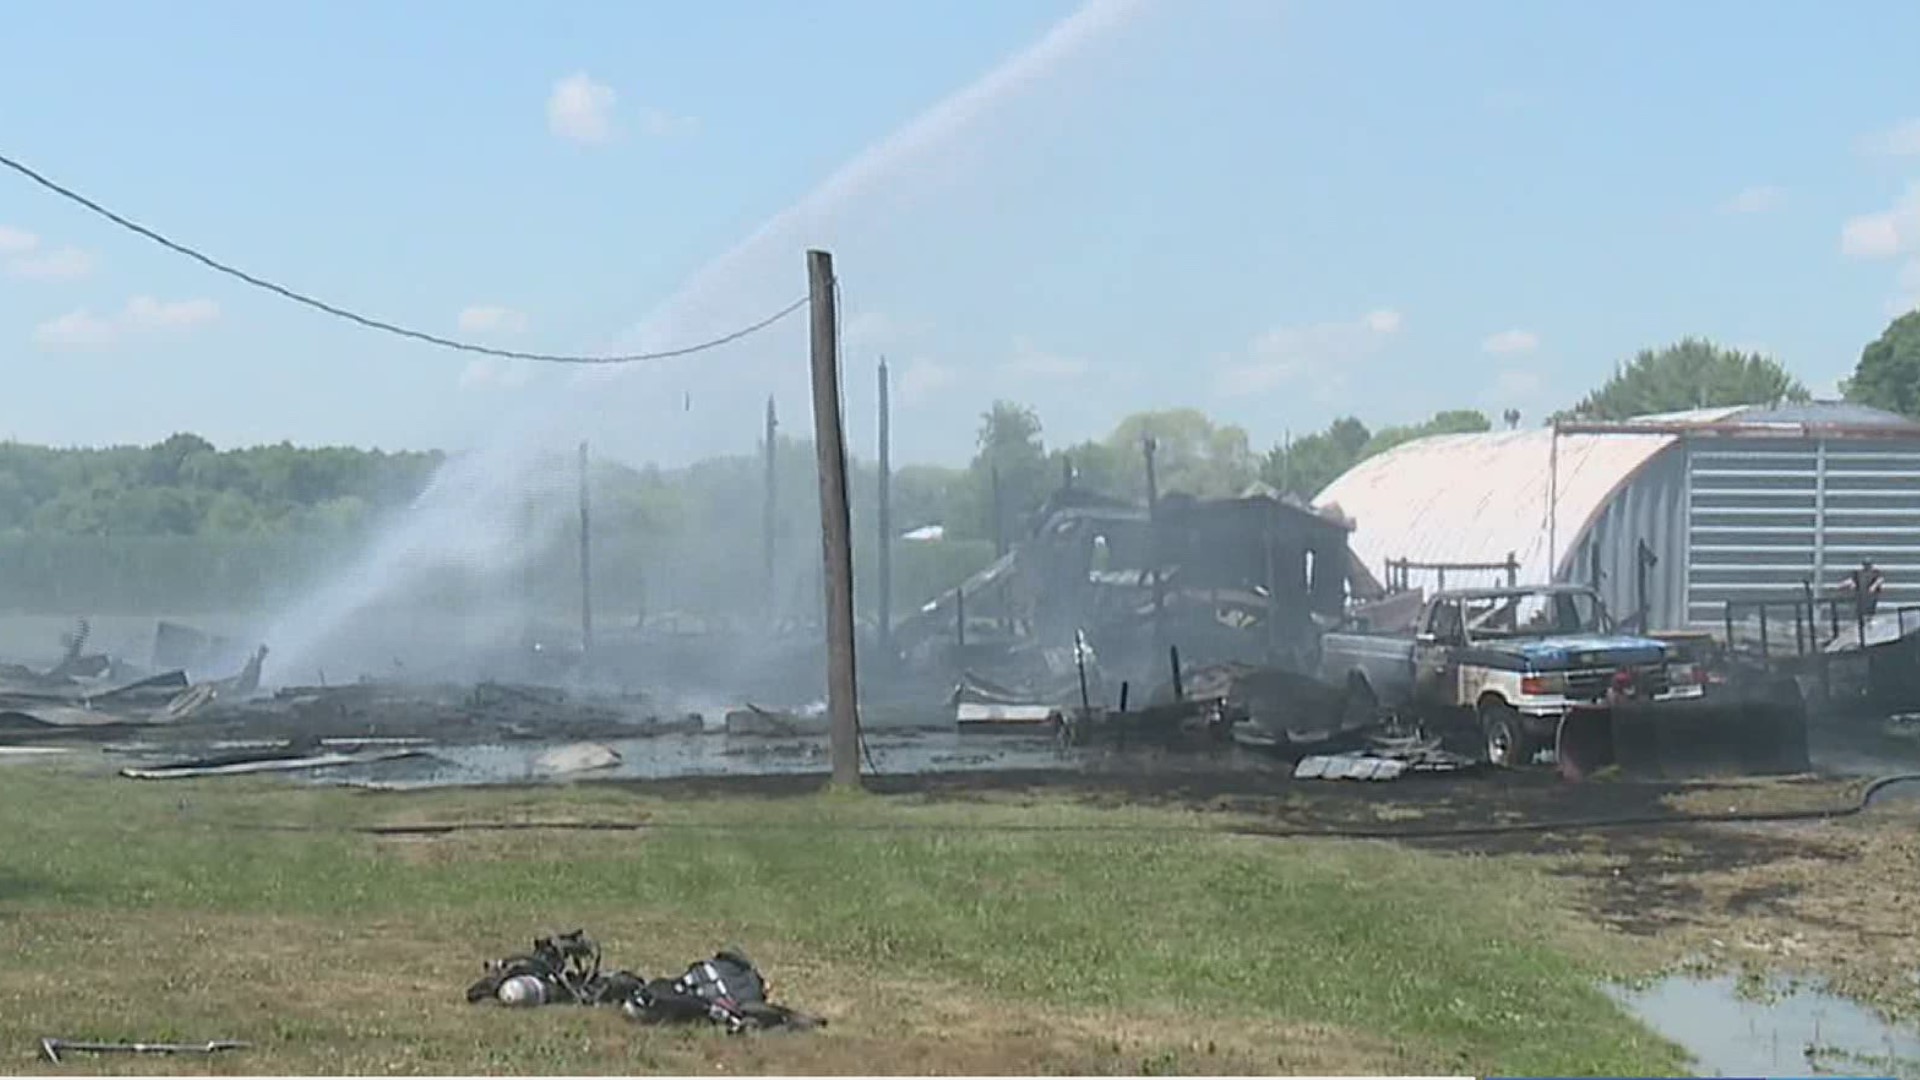 Neighbors spotted flames coming from the barn along Route 405 near Hughesville.